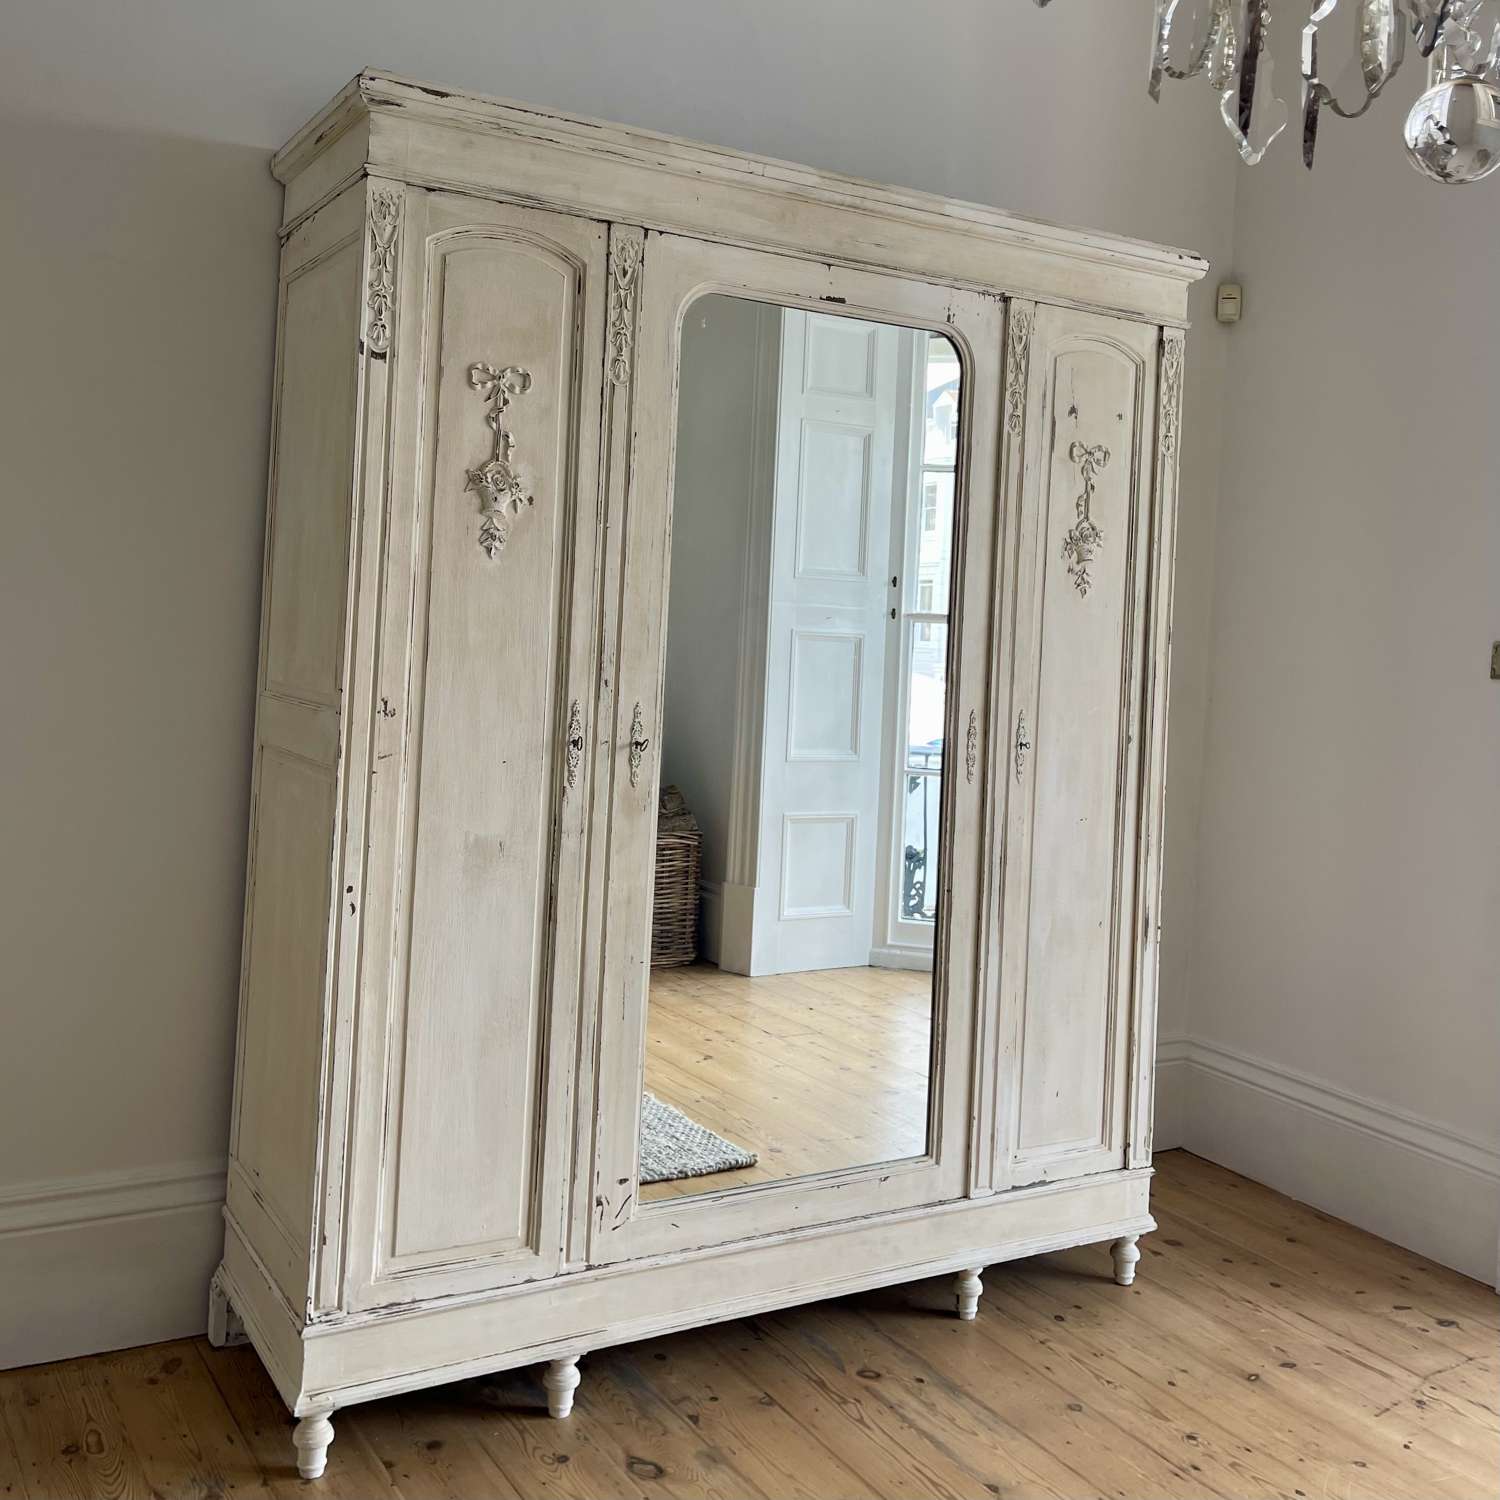 Antique French painted wardrobe with hanging rail